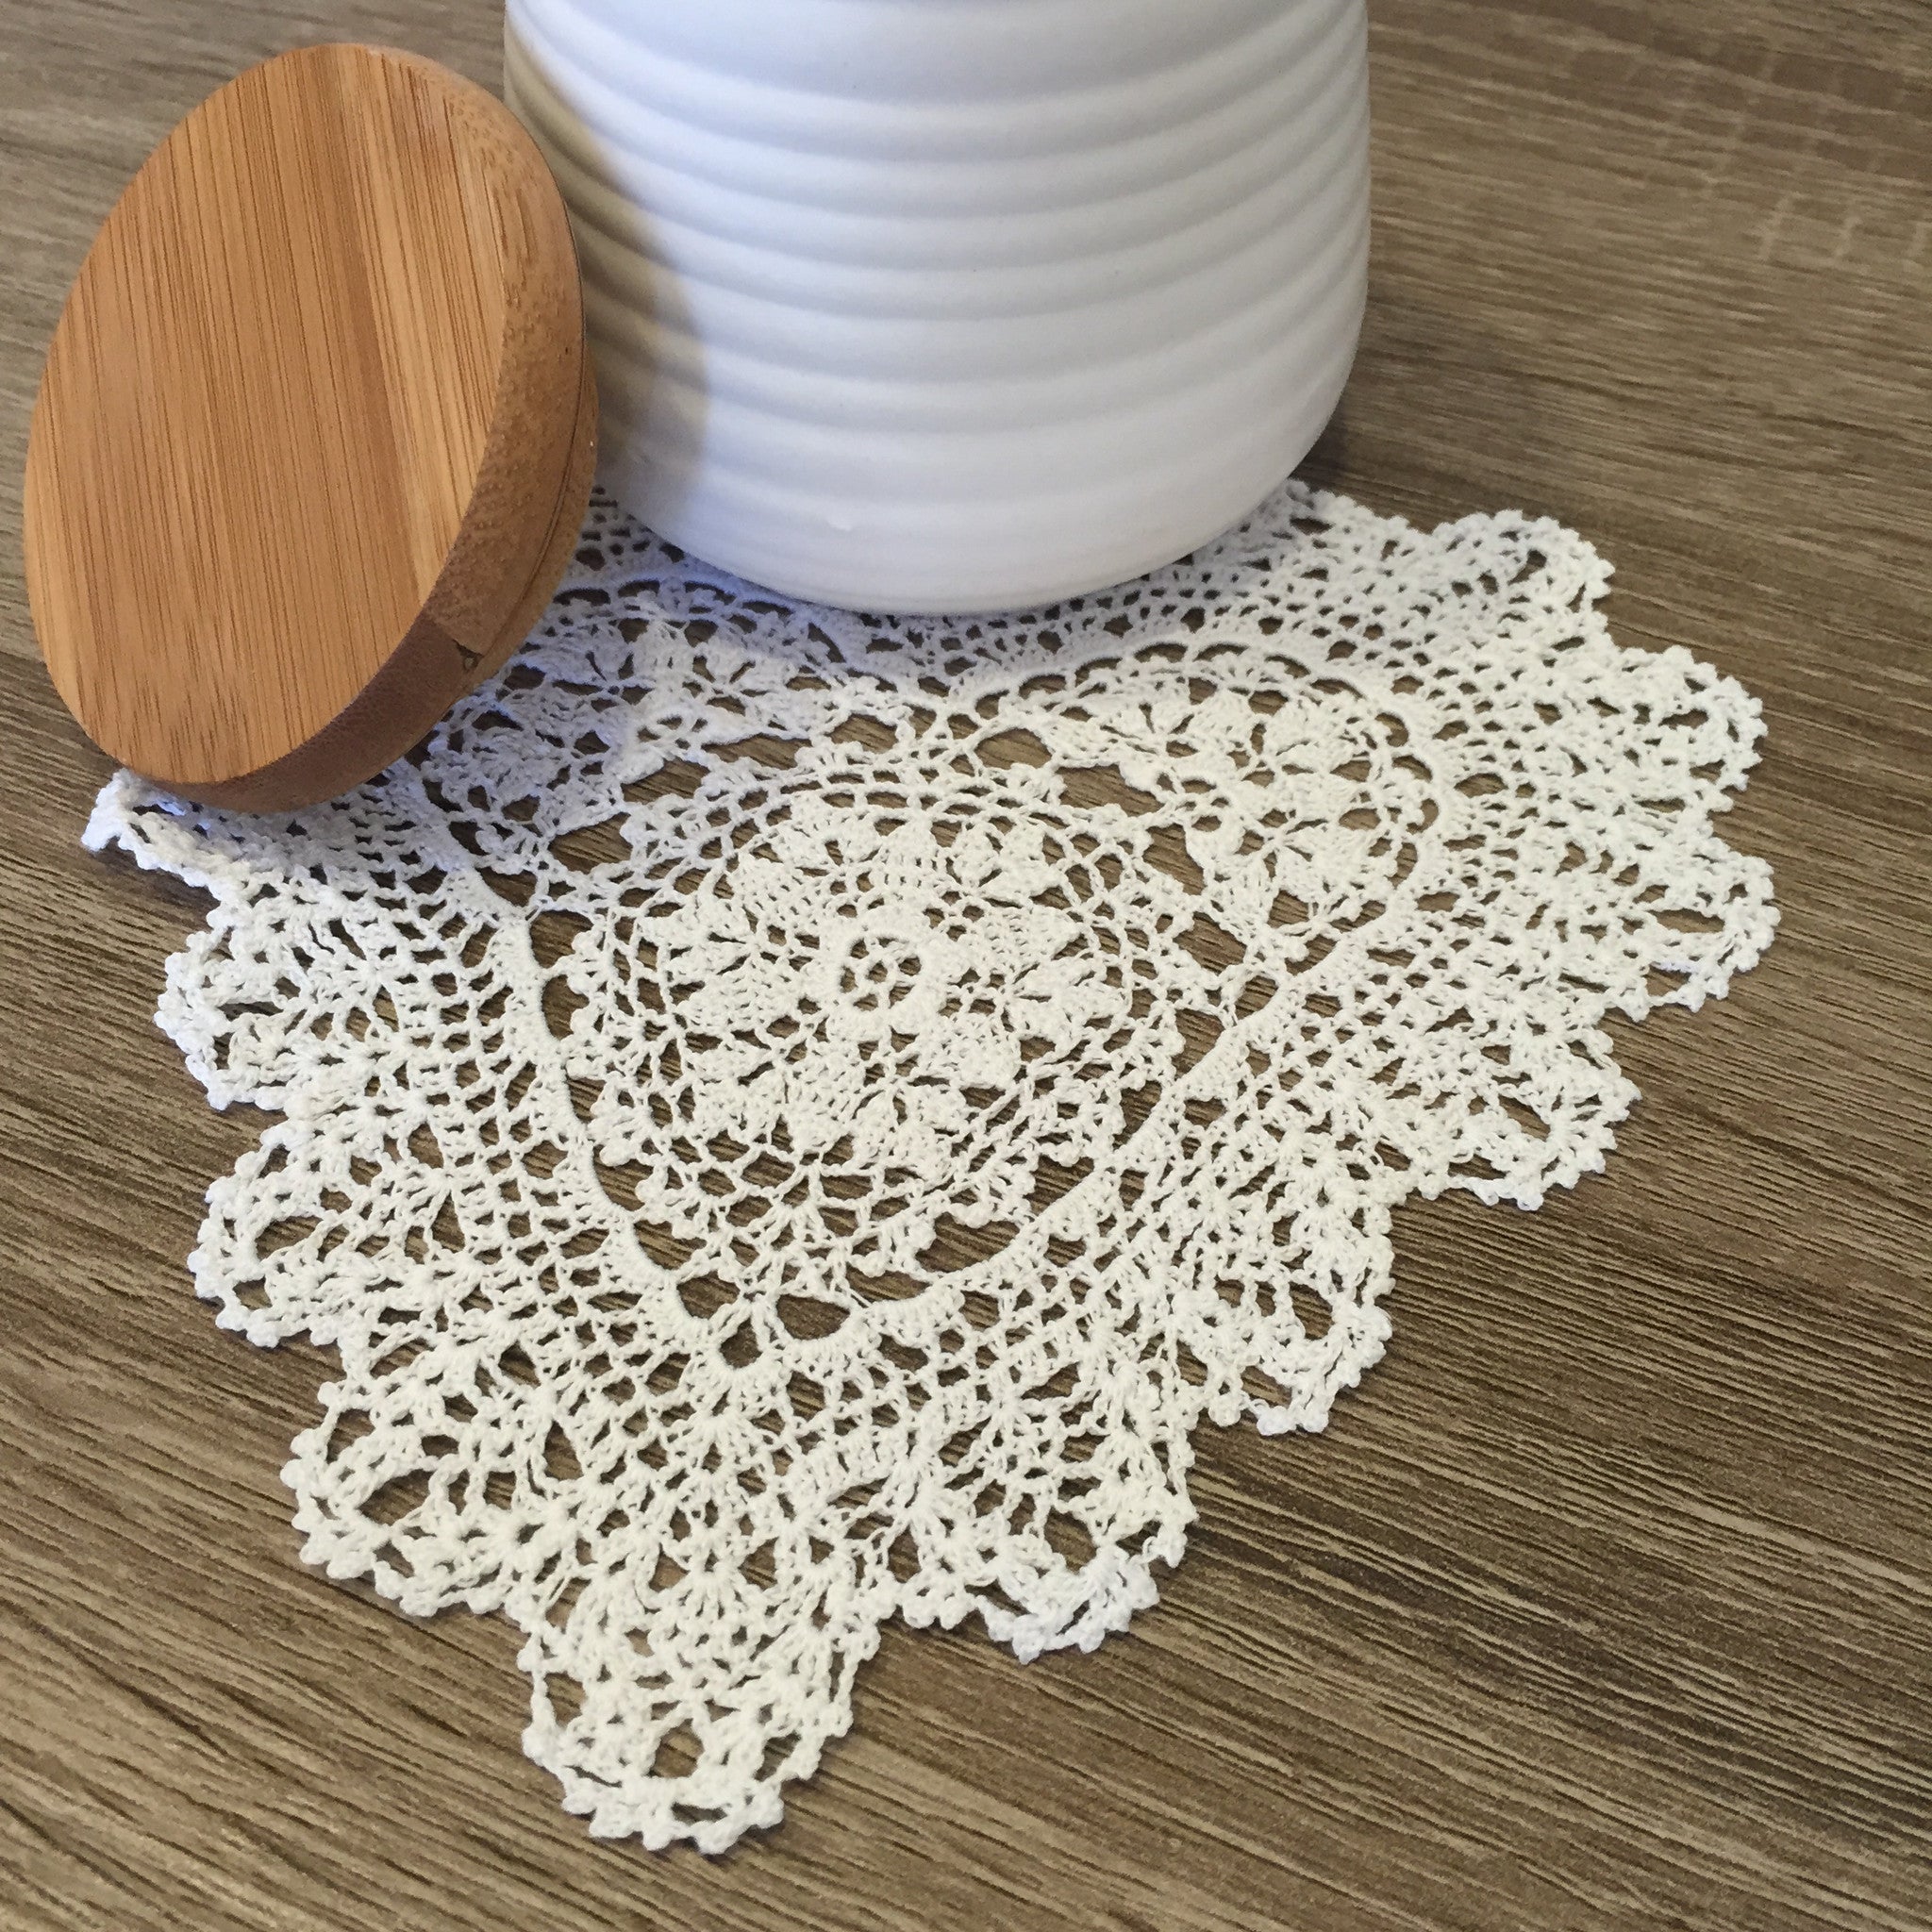 Strawberry Heart Shaped Doilies White 6 Inch Set of 12 — Accent Linens